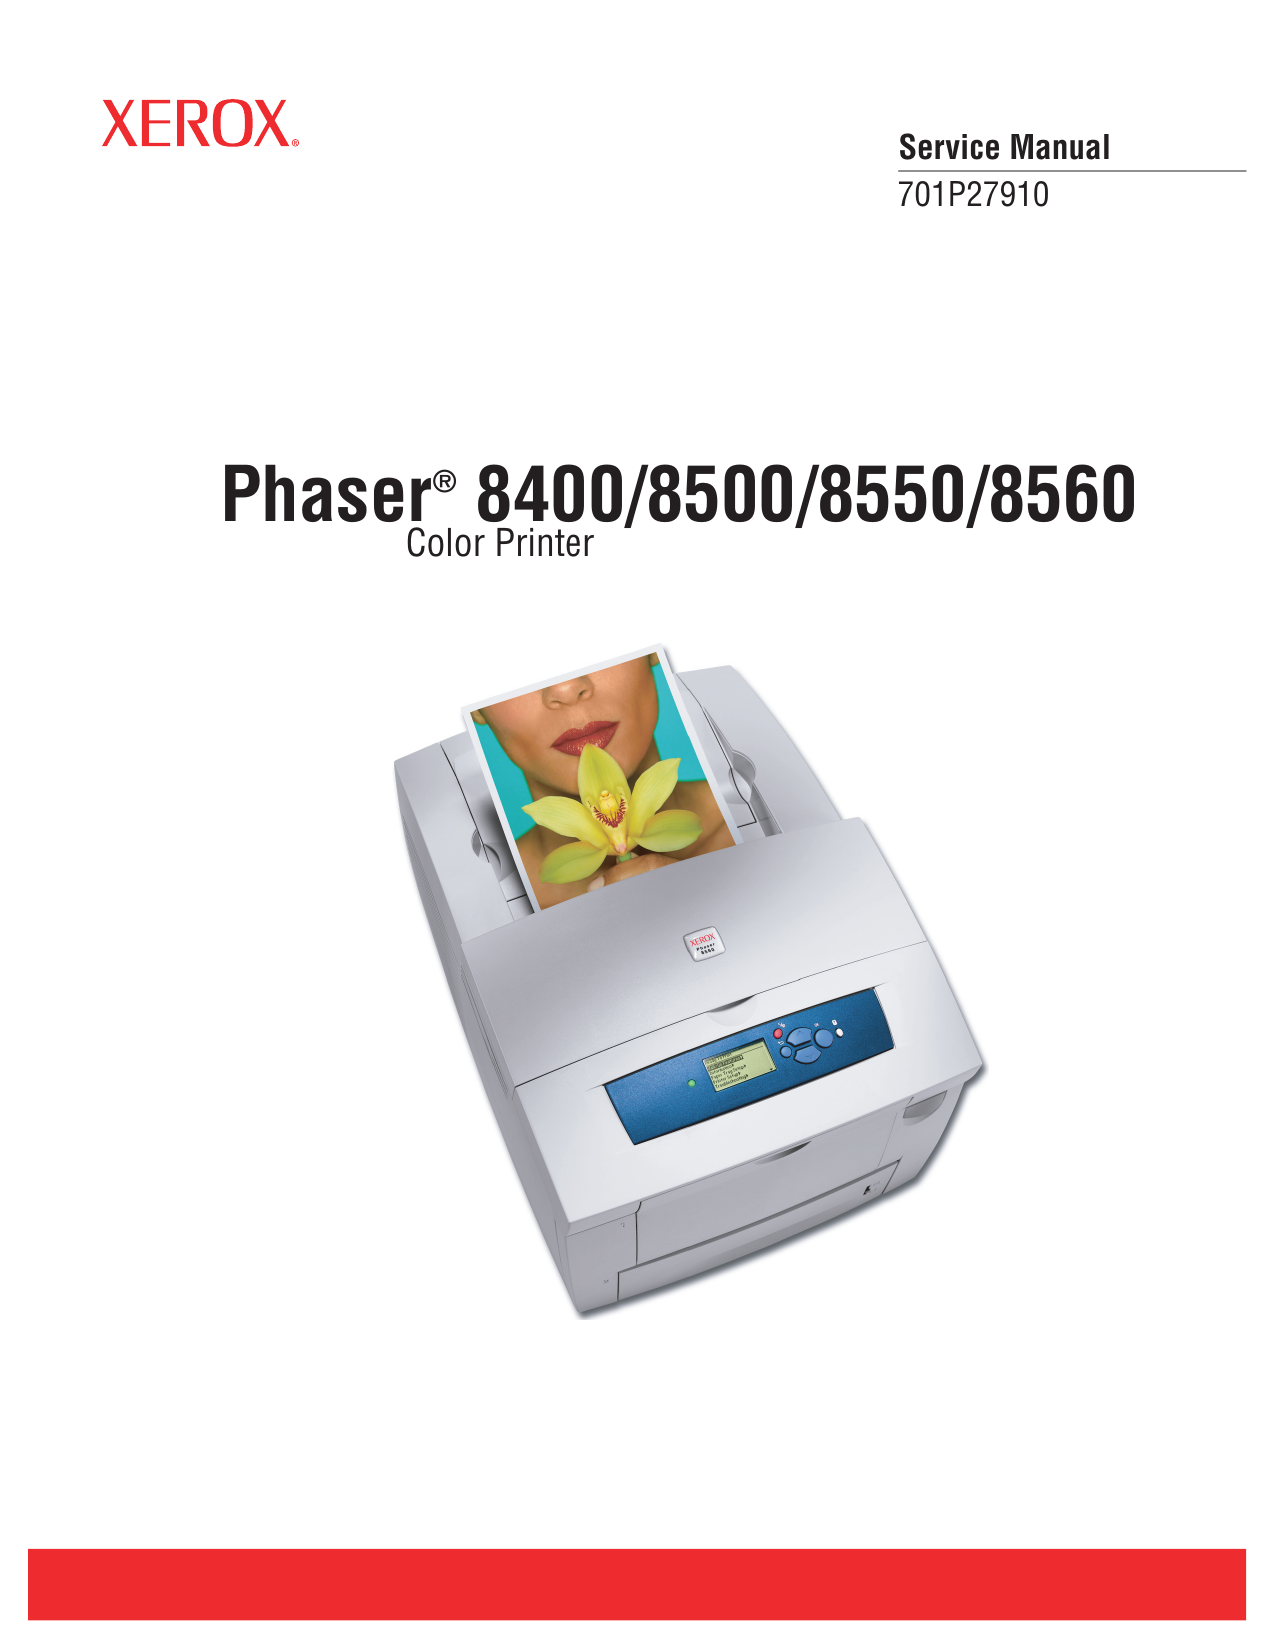 Xerox Phaser 8400, 8500, 8550, 8560 color printer service manual Preview image 6